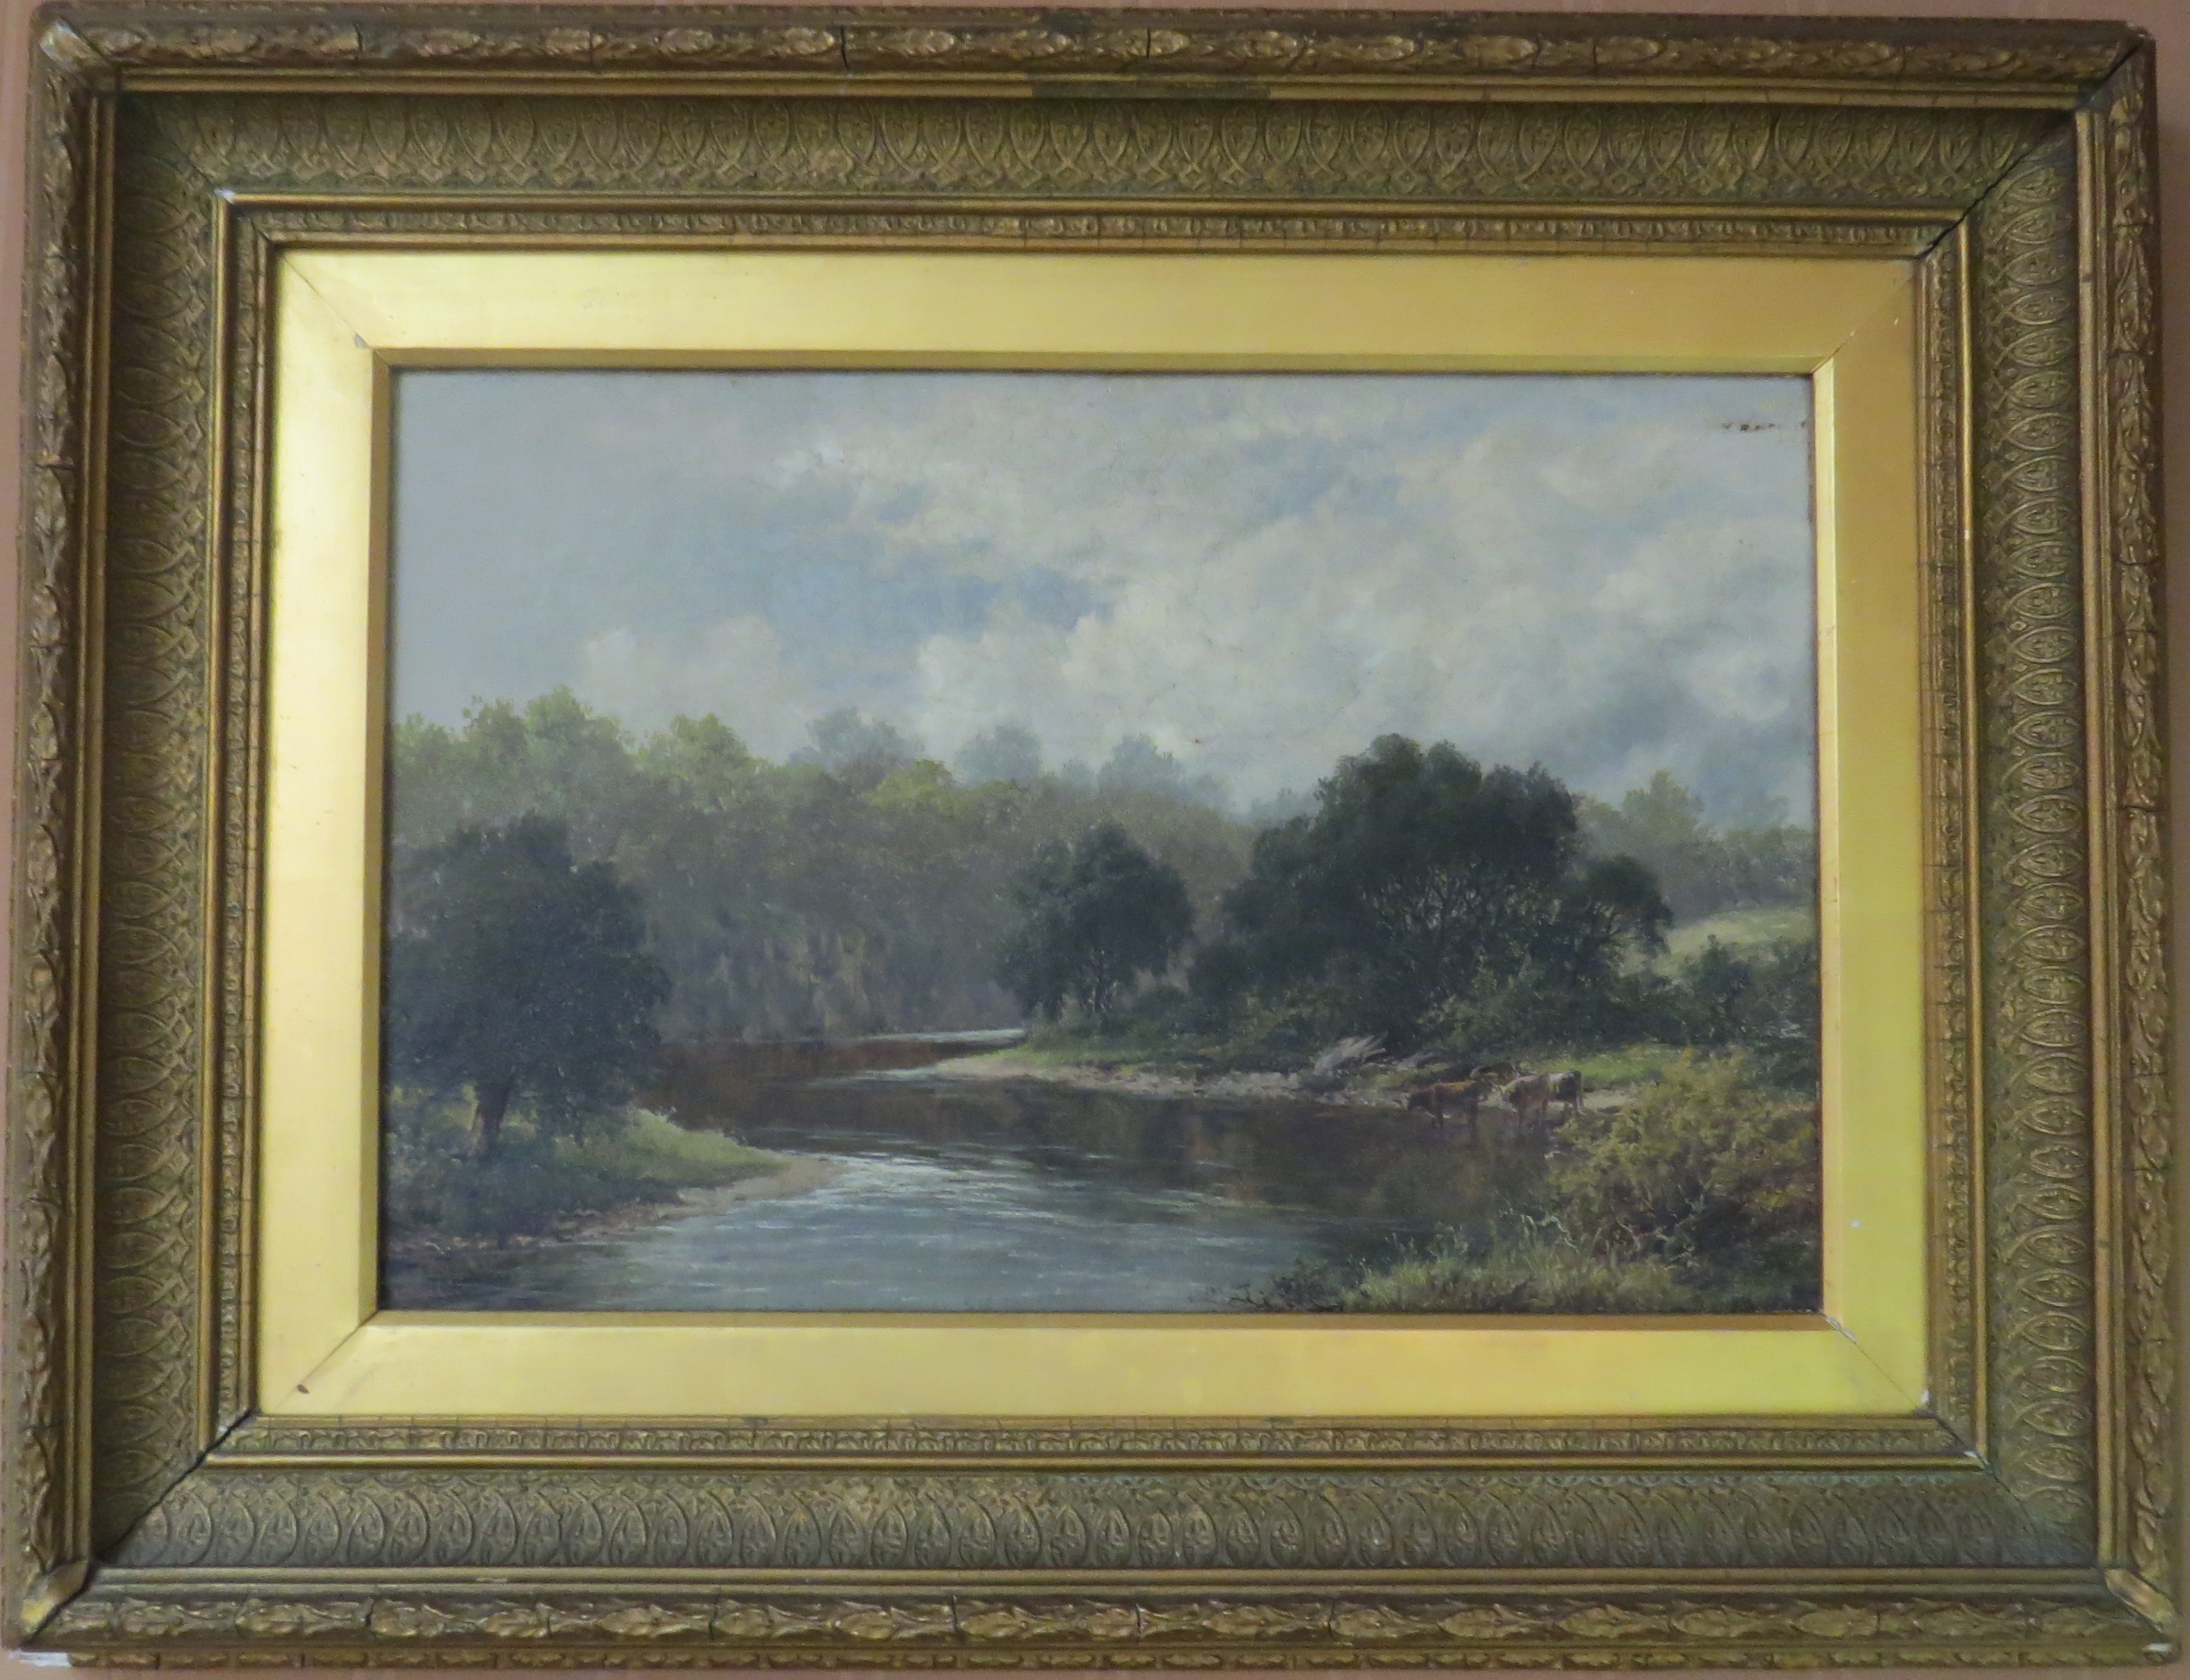 Oil on Canvas of an English Landscape with River & Cattle, Signed W.H. Mander